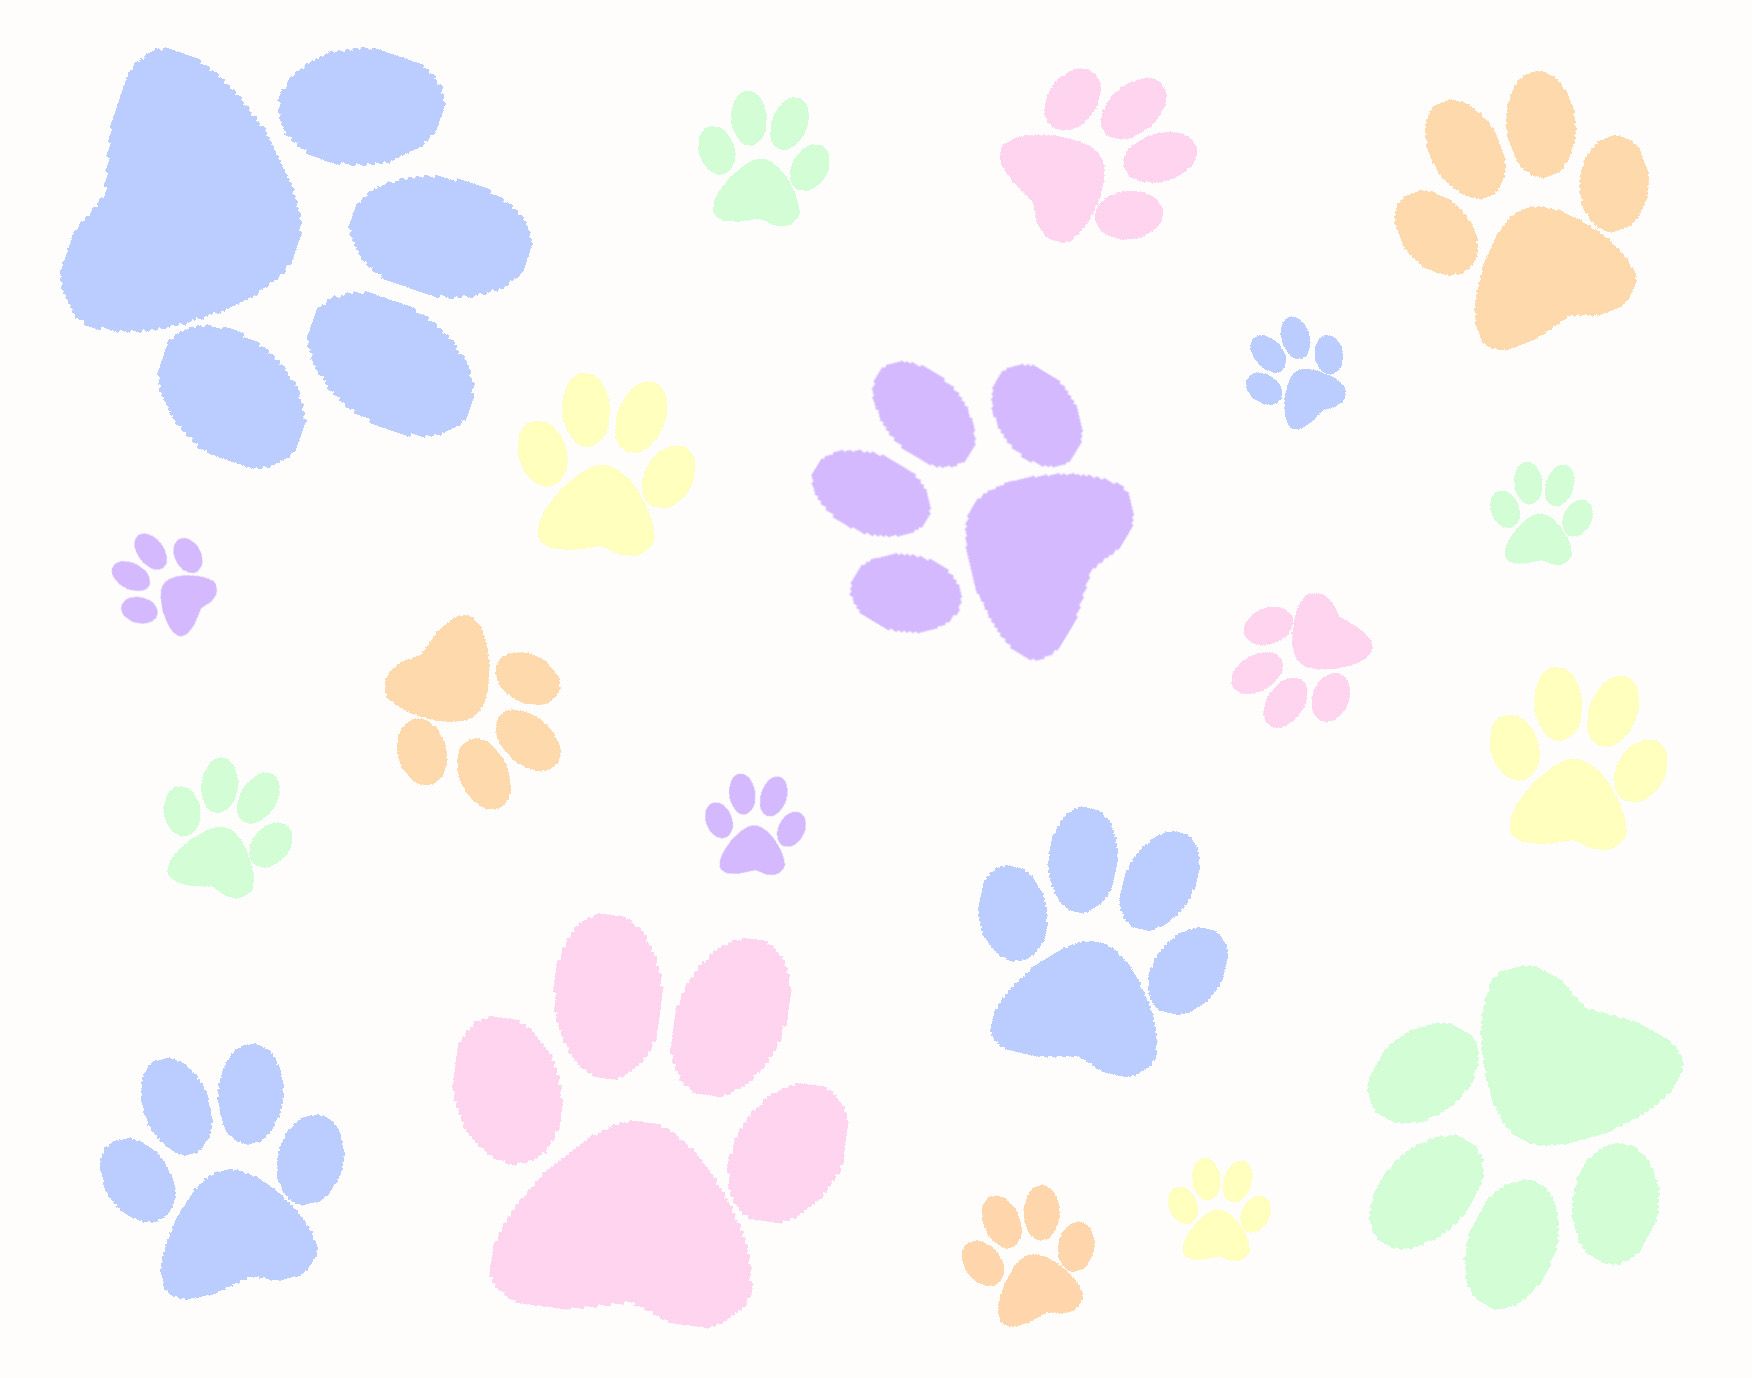 Animal Paws Background Google Search